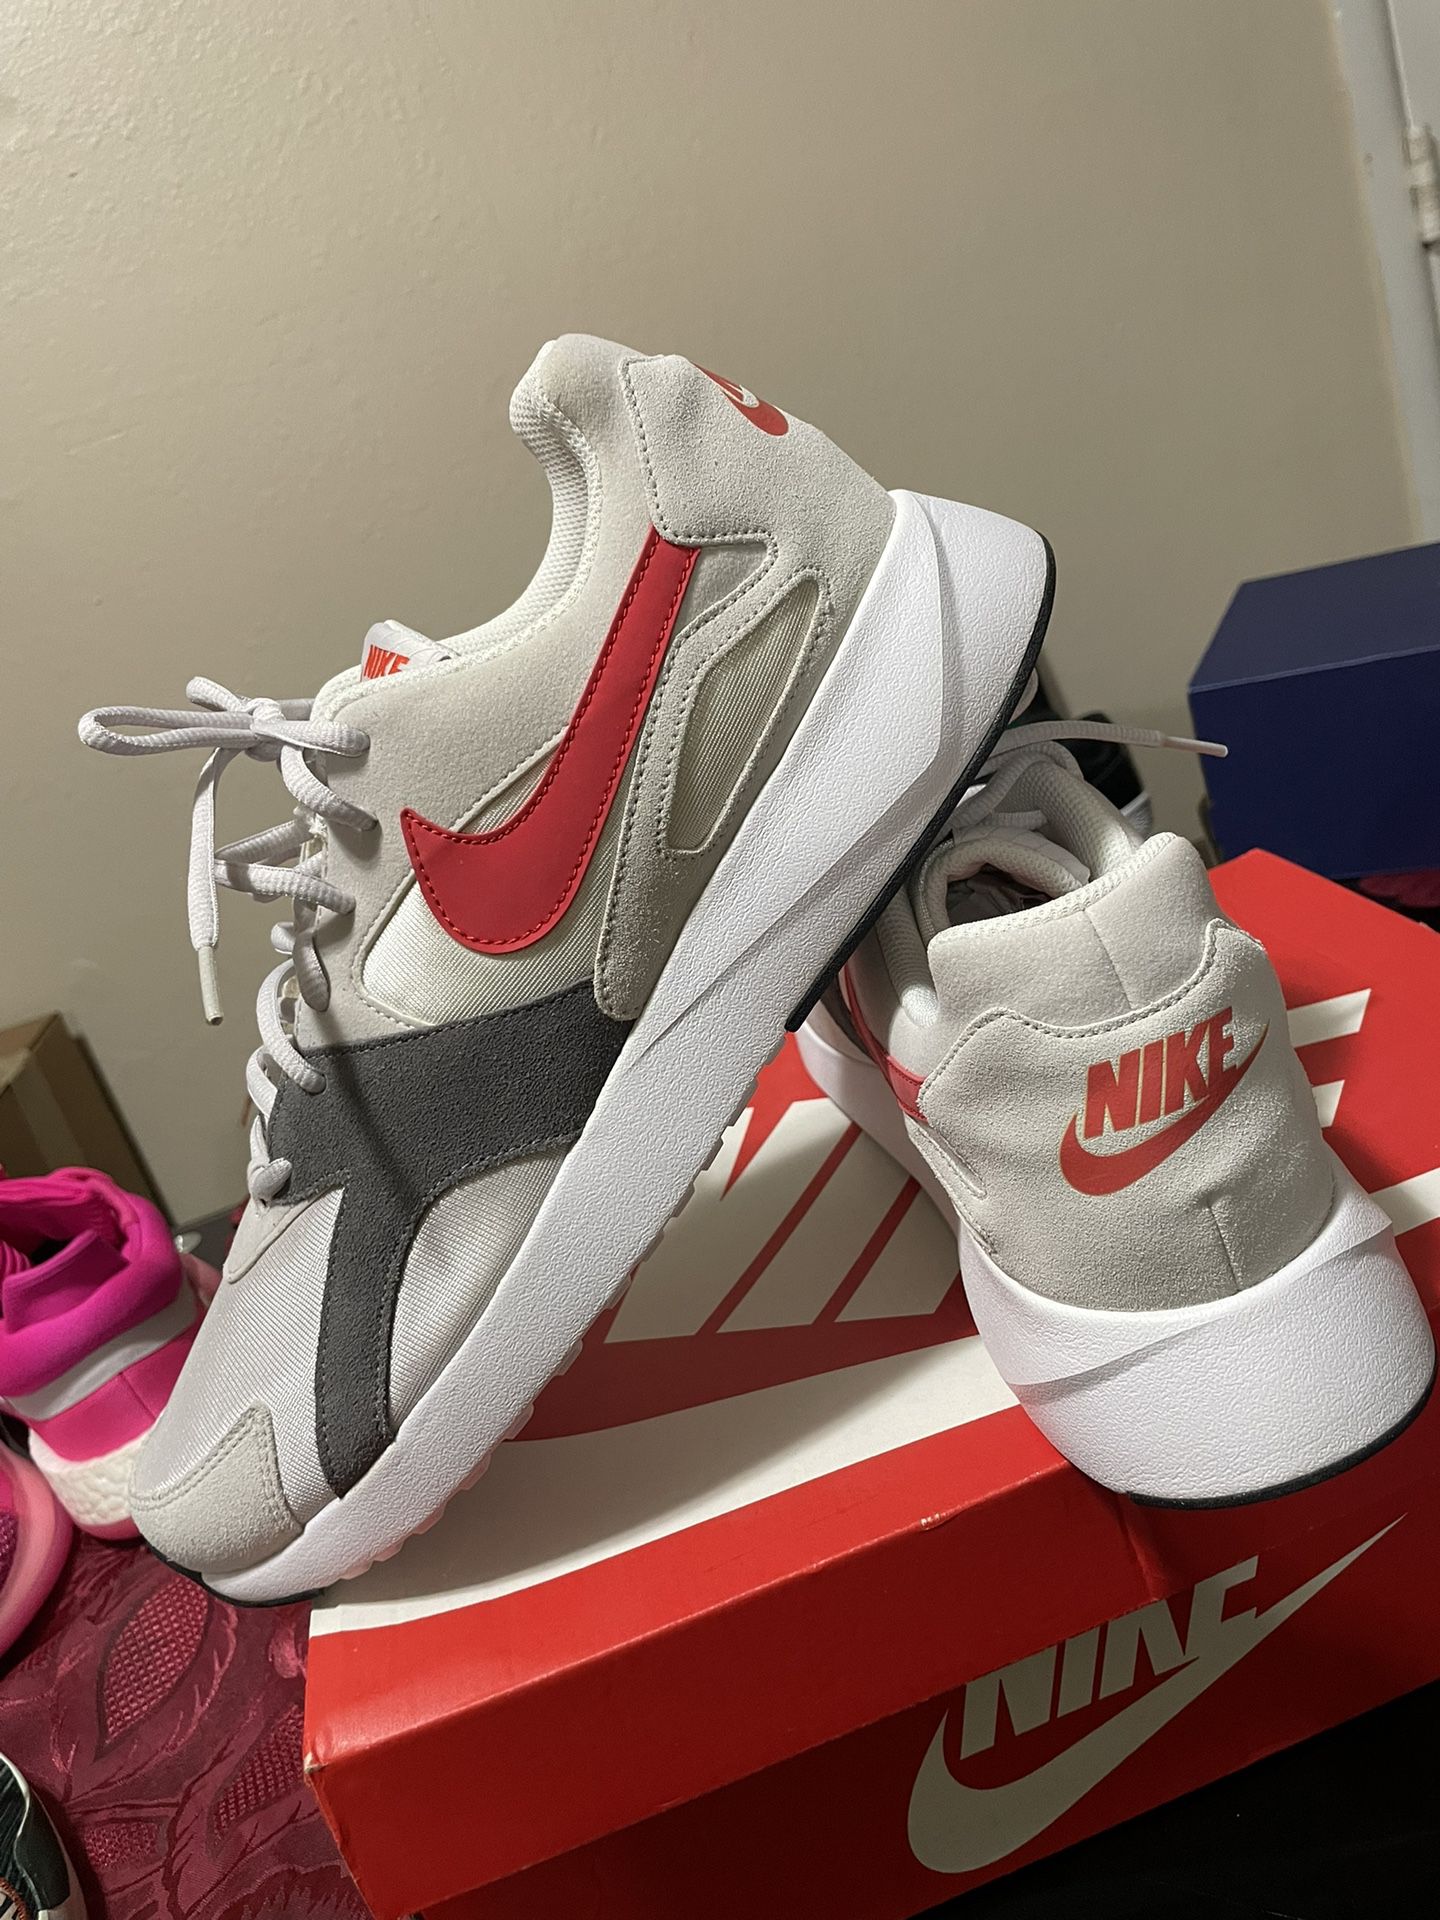 Nike Pantheos Varsity Grey Red Retro Men's Shoes Size 11.5 for Sale in Saint Joseph, MO - OfferUp